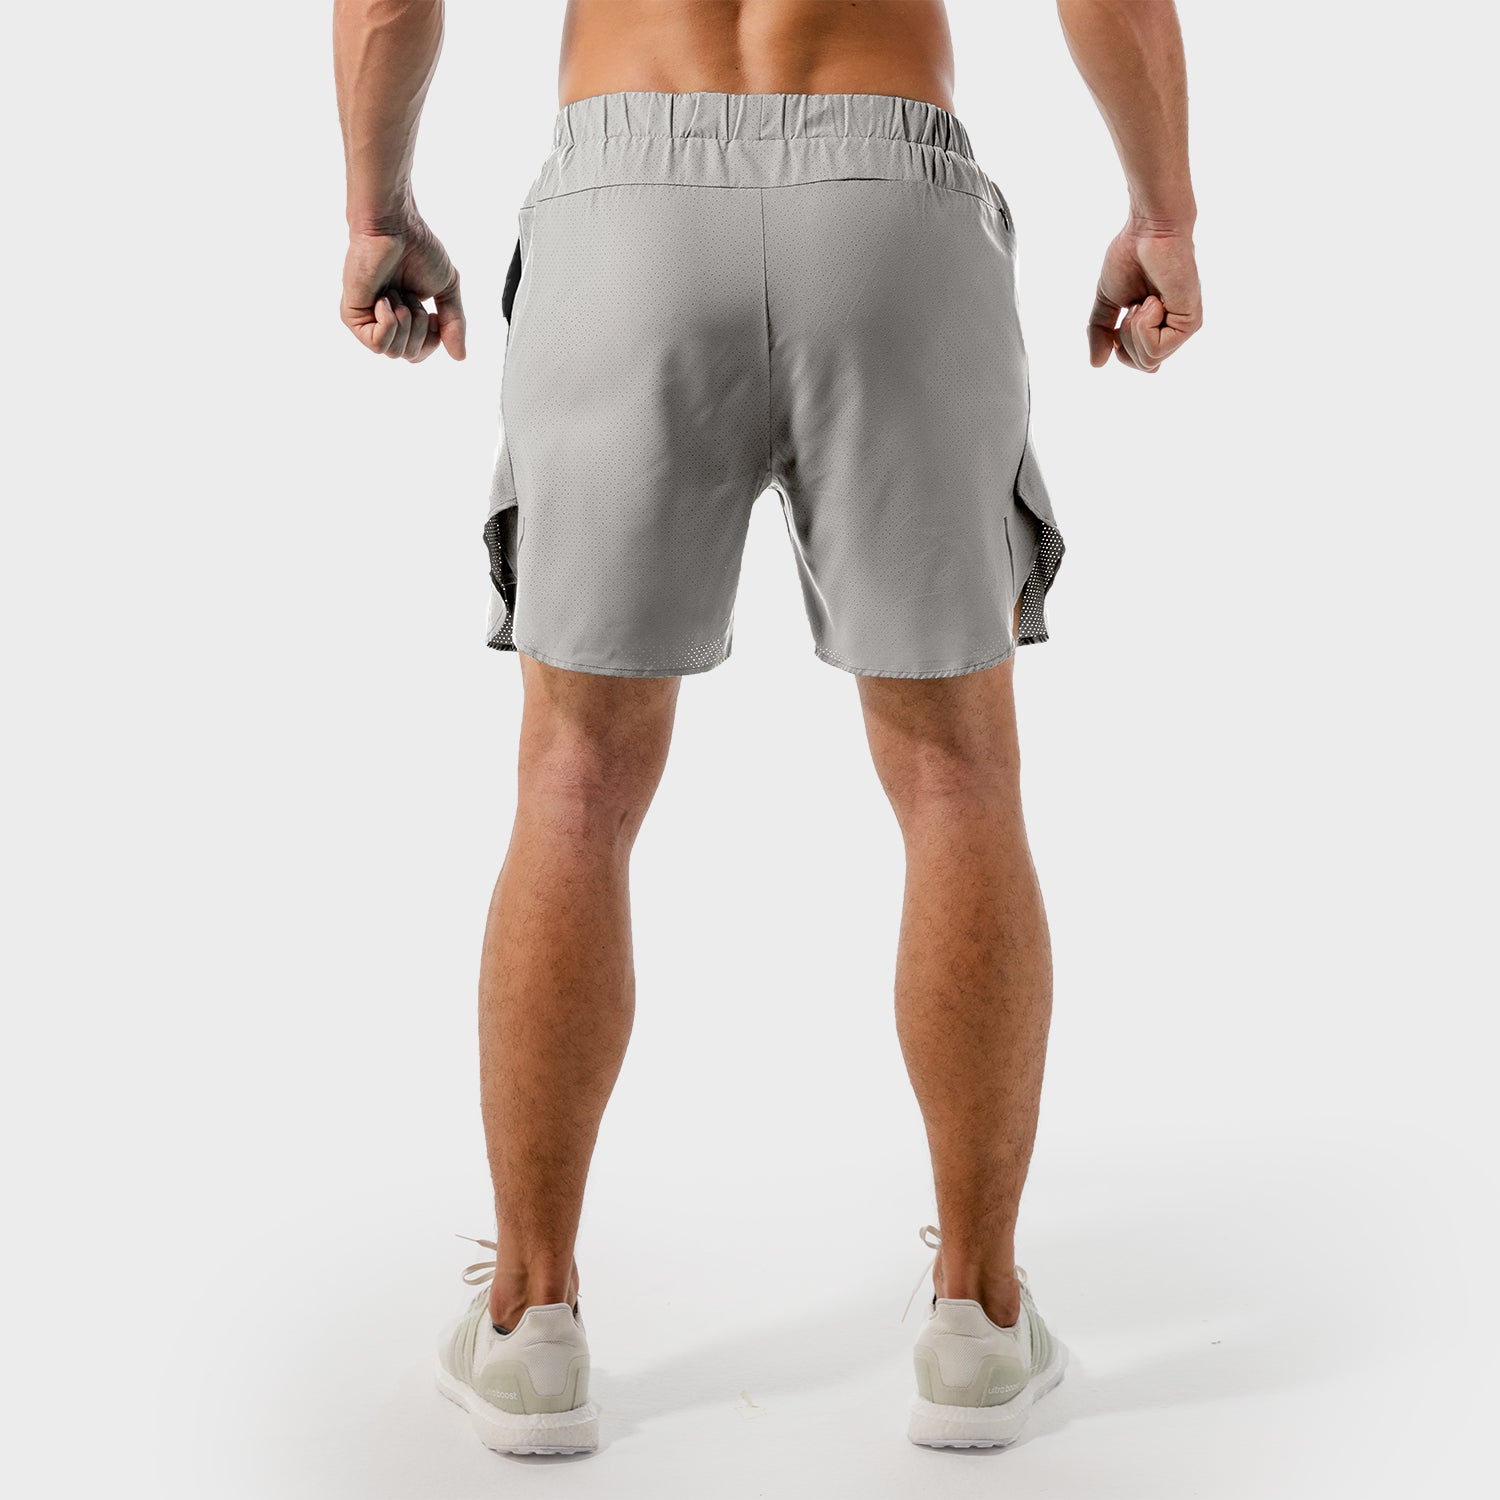 2-IN-1 DRY TECH SHORTS 2.0 – New Edition